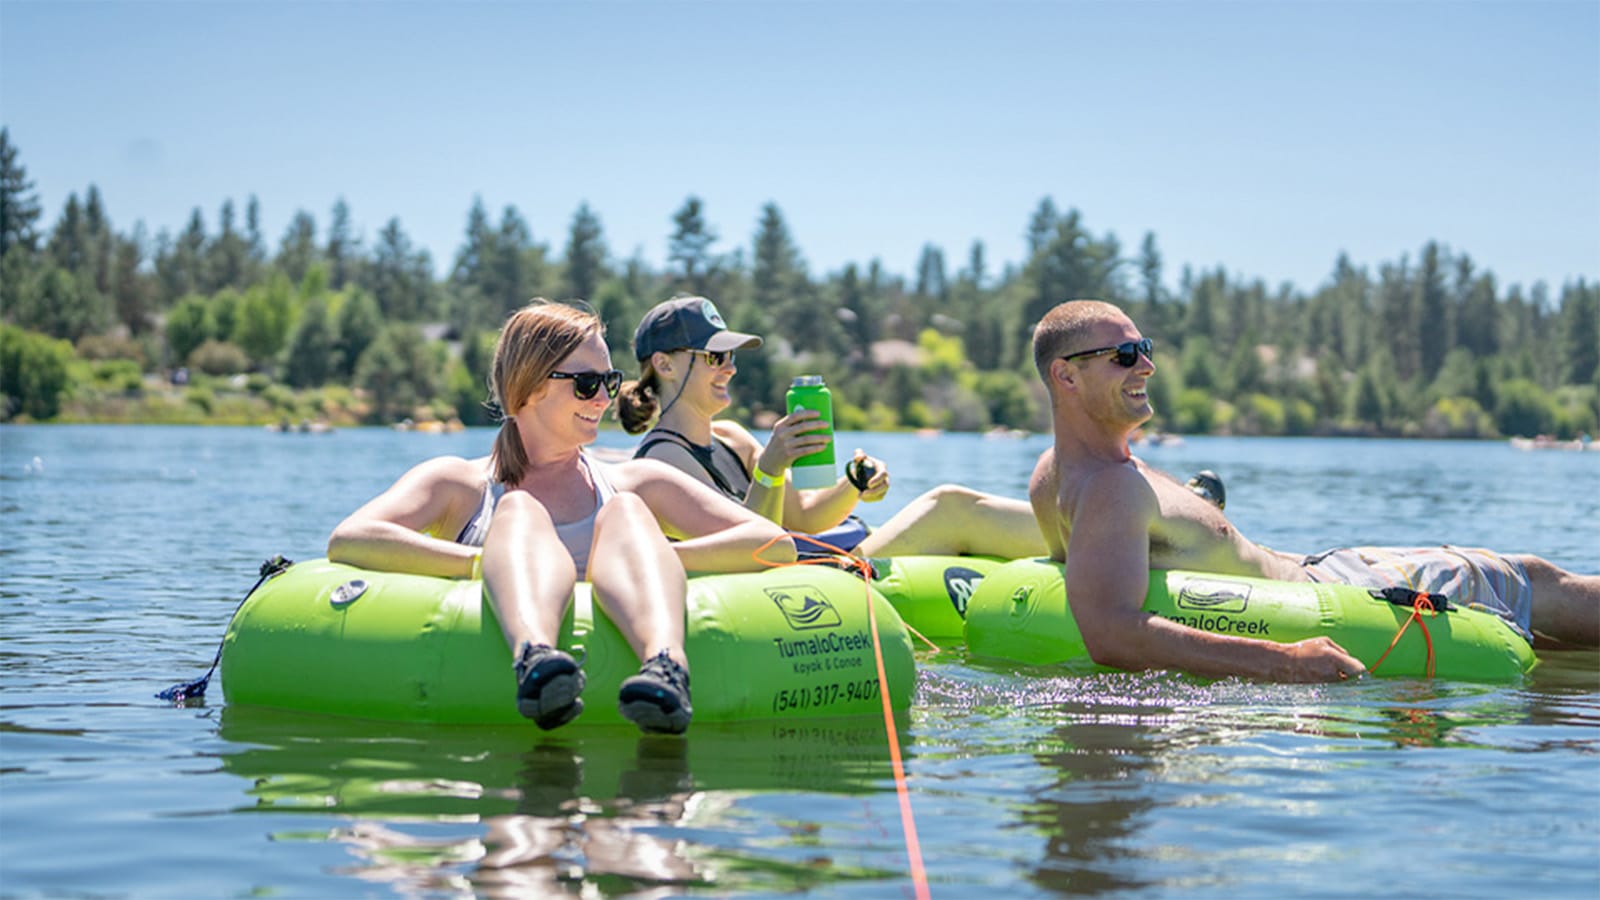 A group floating the river in Bend, Oregon.